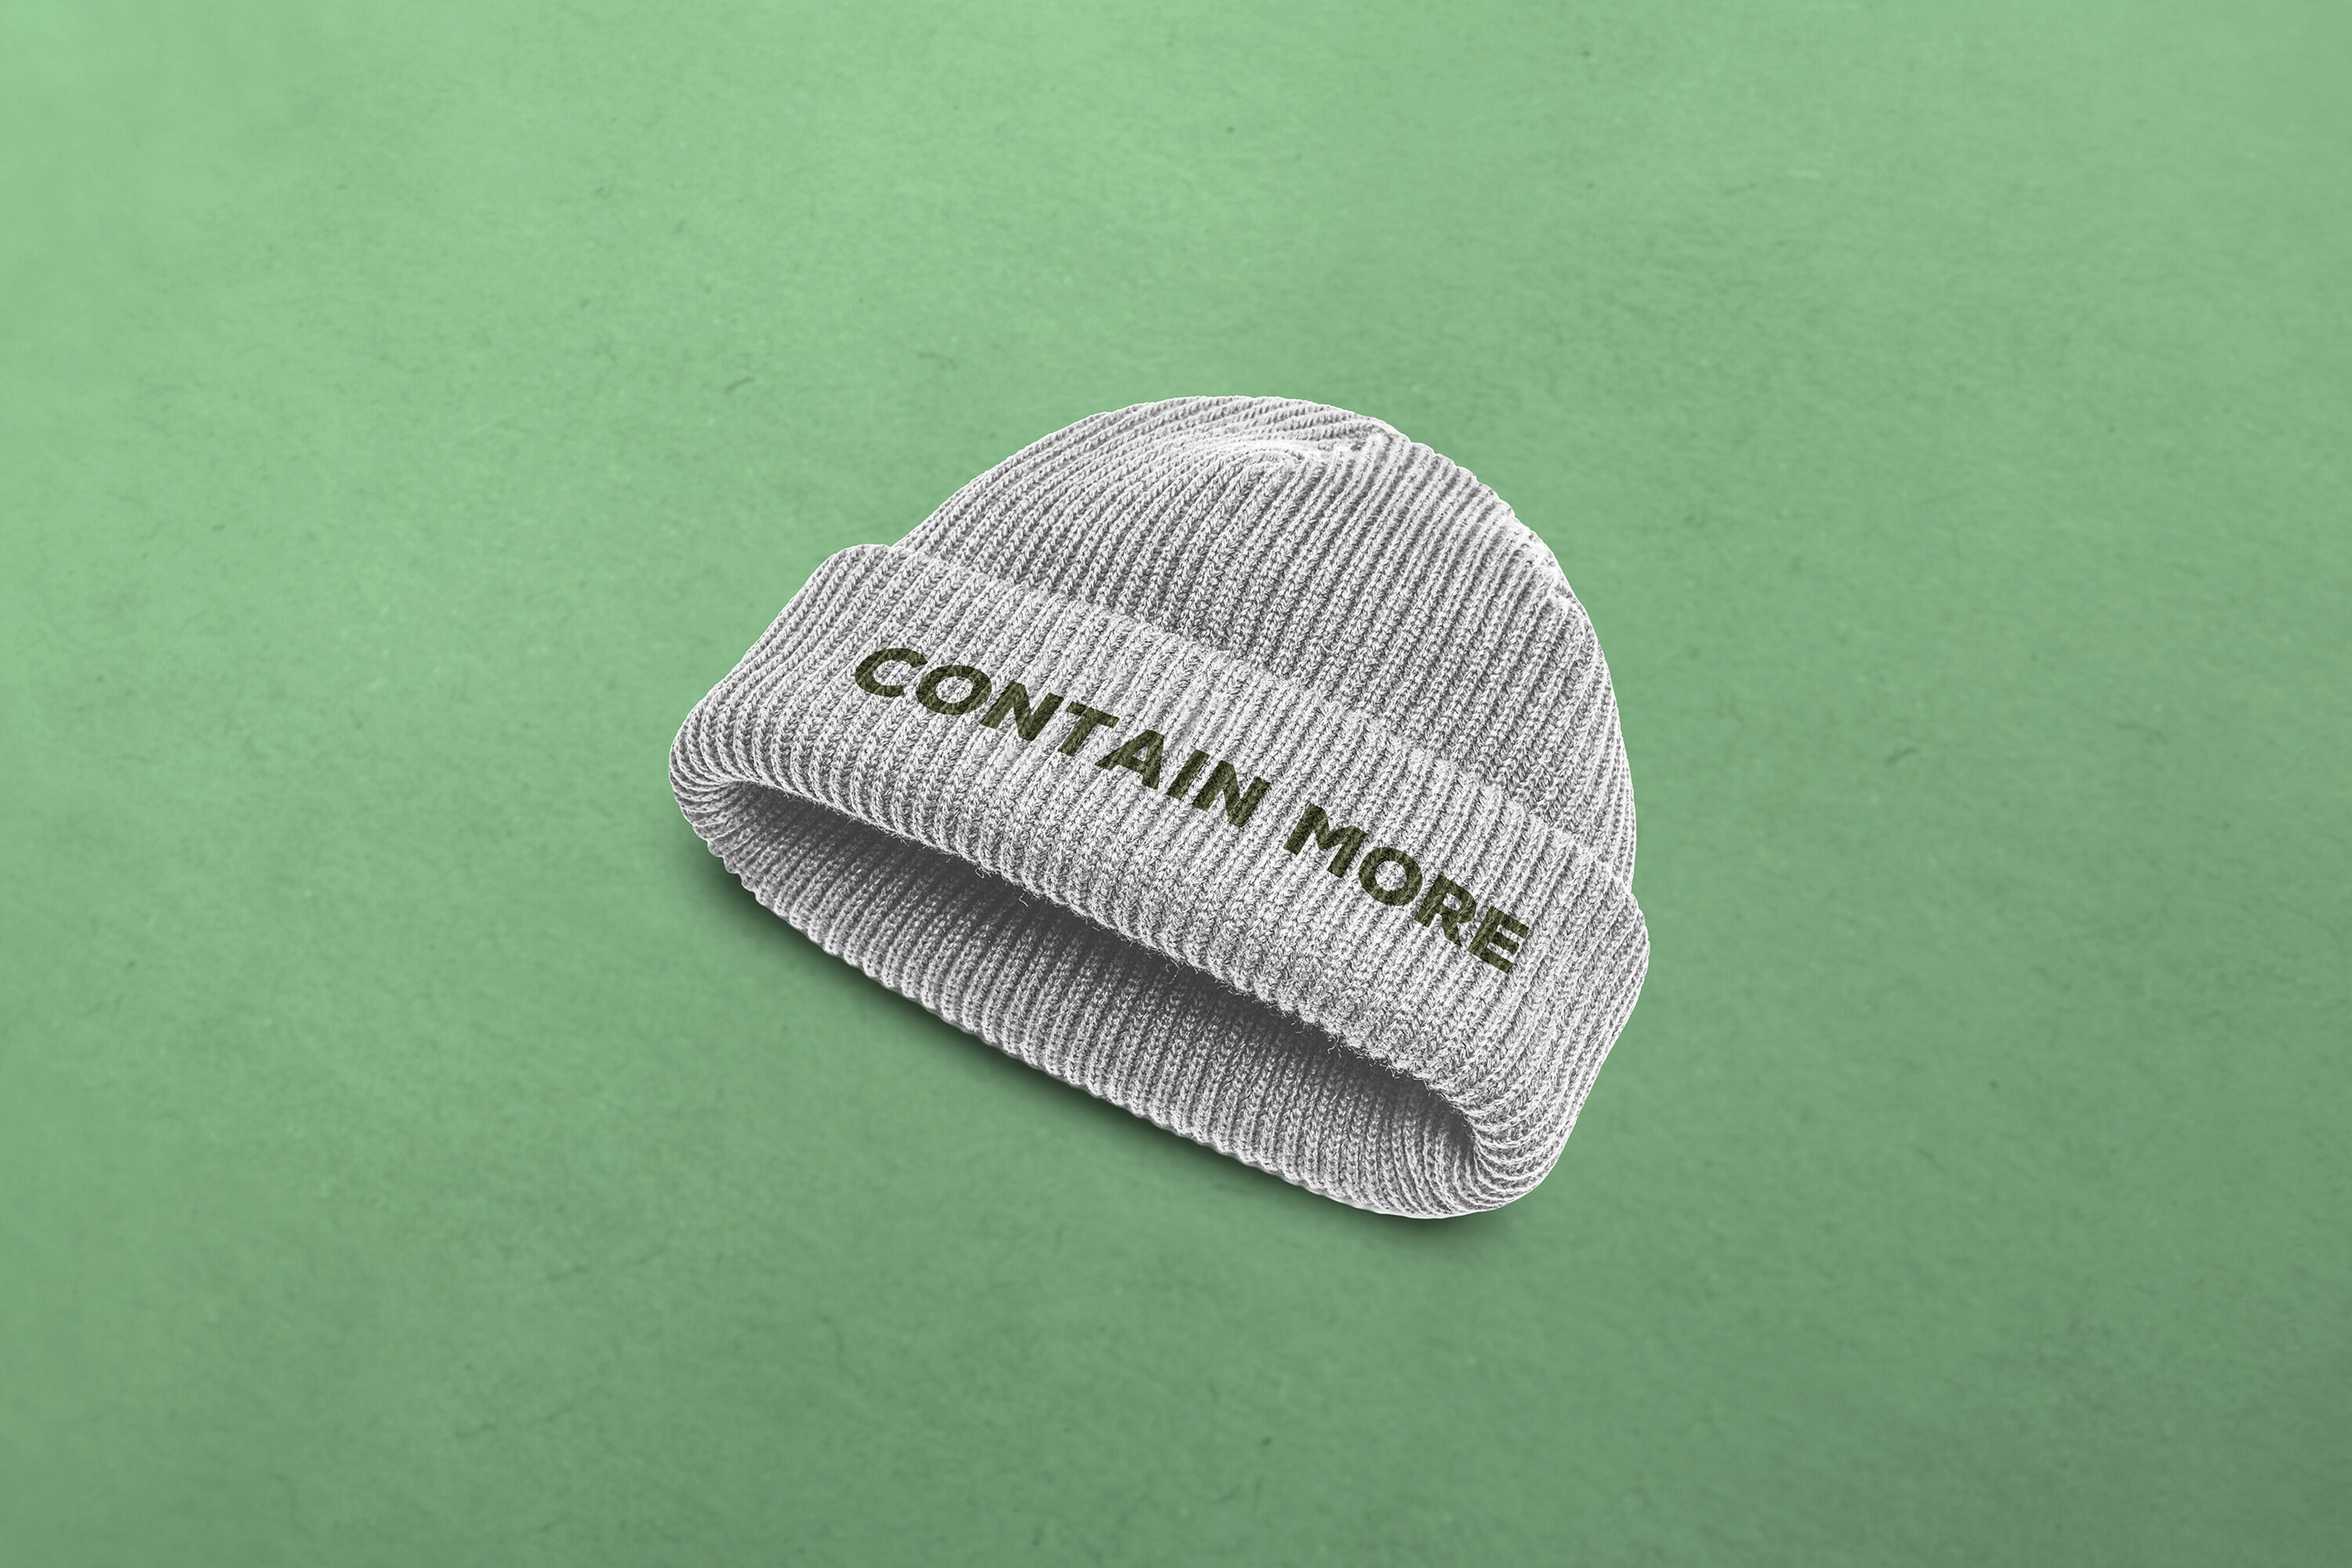 Download Beanie Mockup By Uncentrifuged Pressure | TheHungryJPEG.com